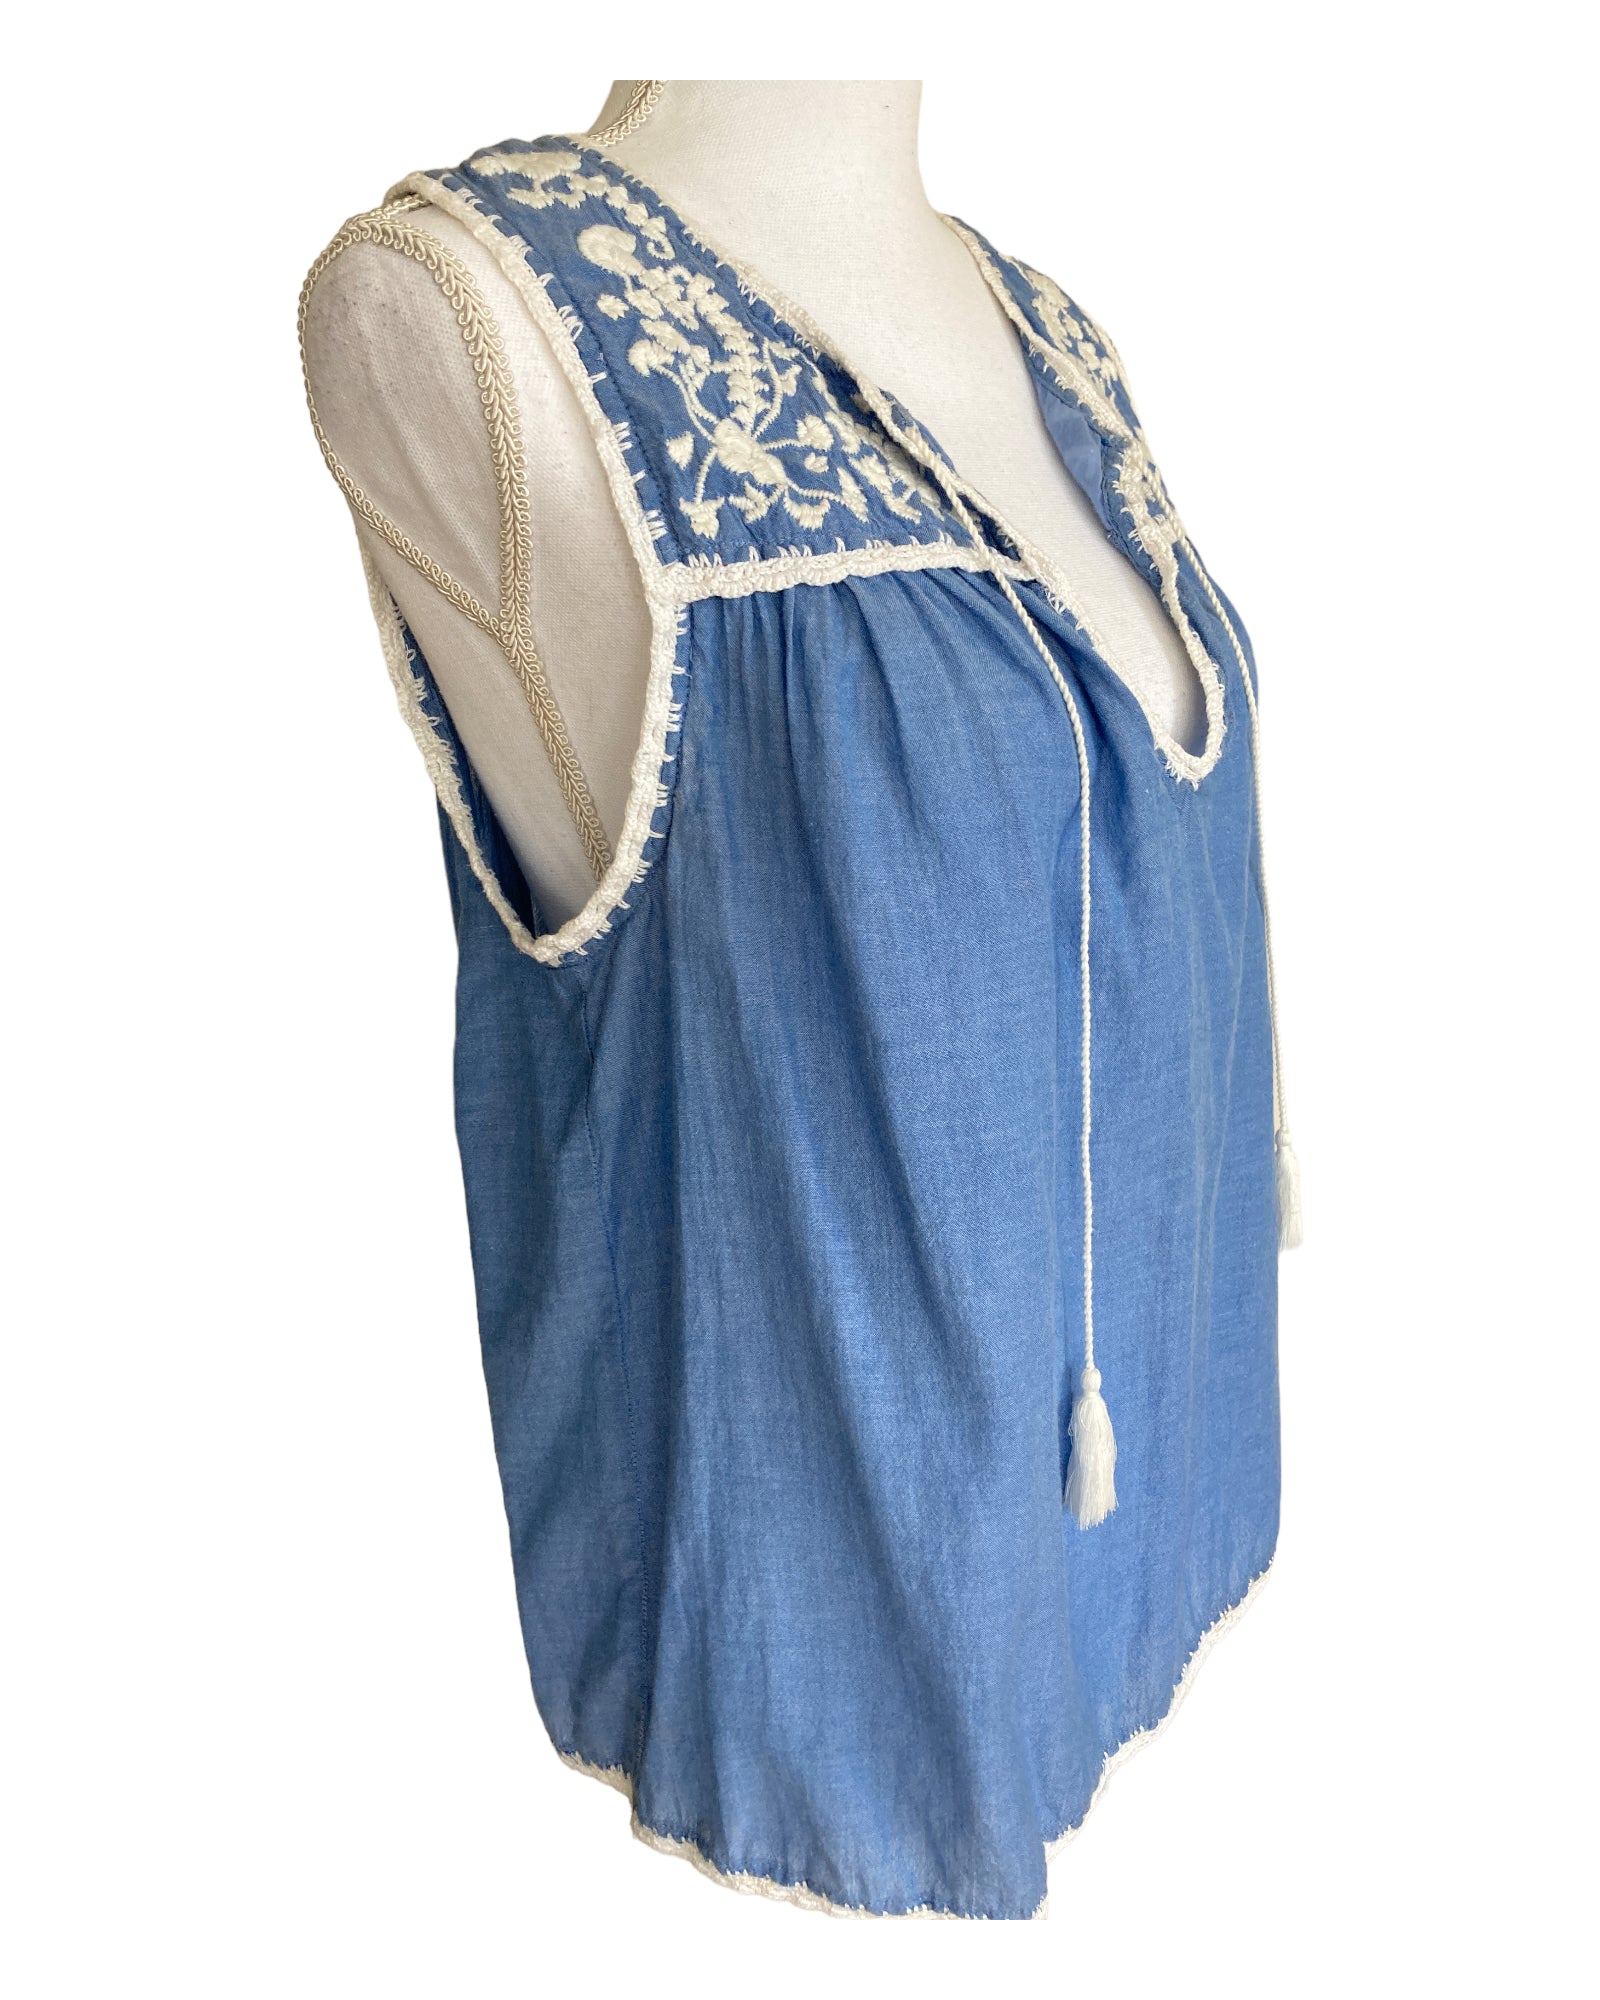 Joie Chambray Embroidered Sleeveless Tunic, M